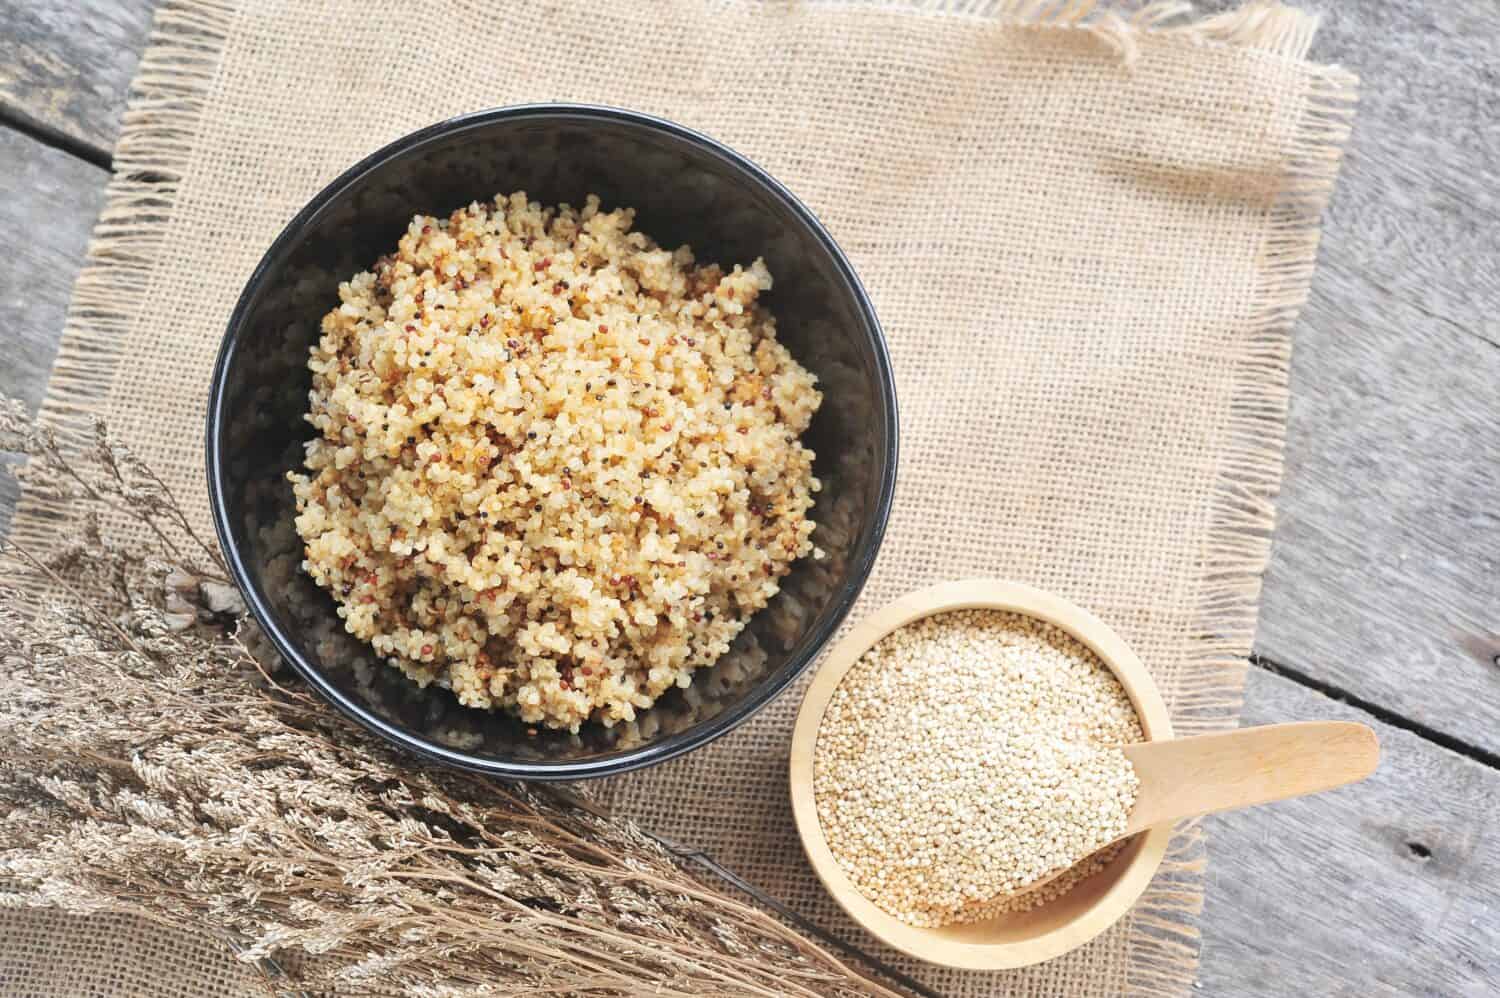 cooked quinoa in a bowl.